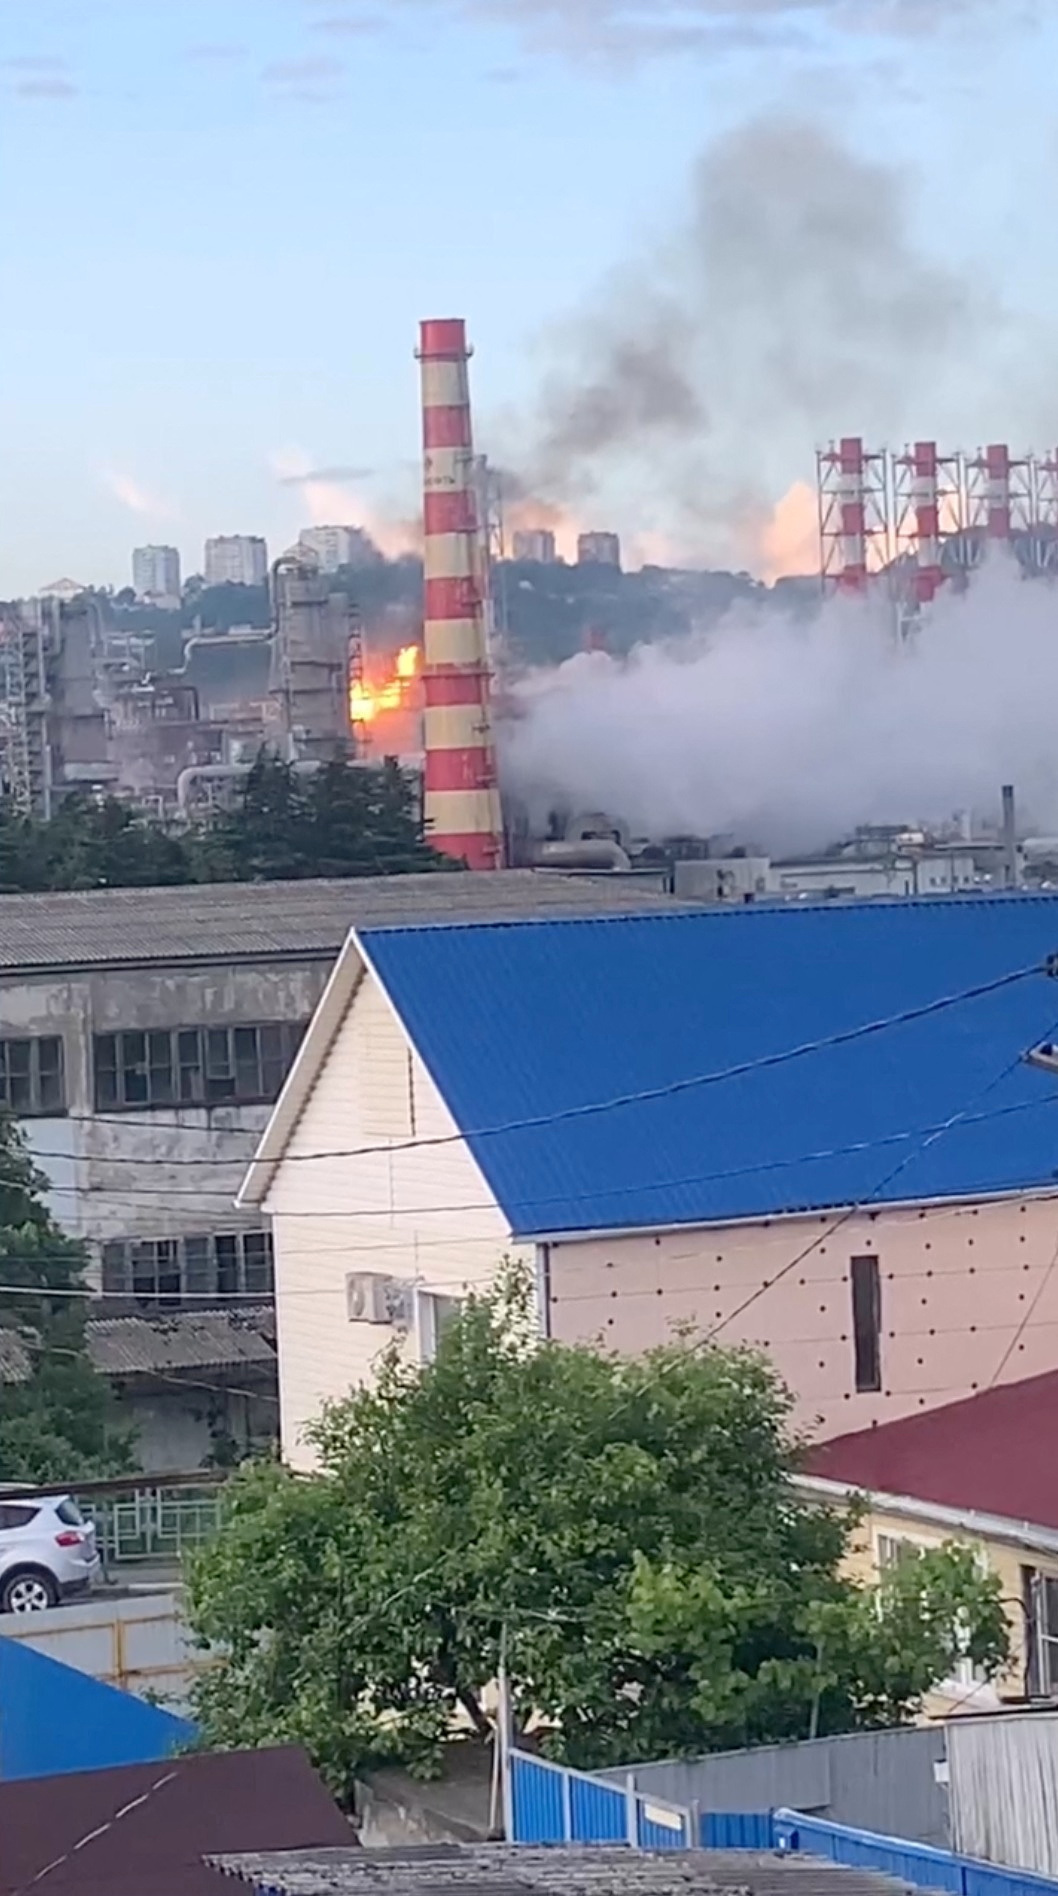 Smoke rises from a fire at an oil refinery, in Tuapse